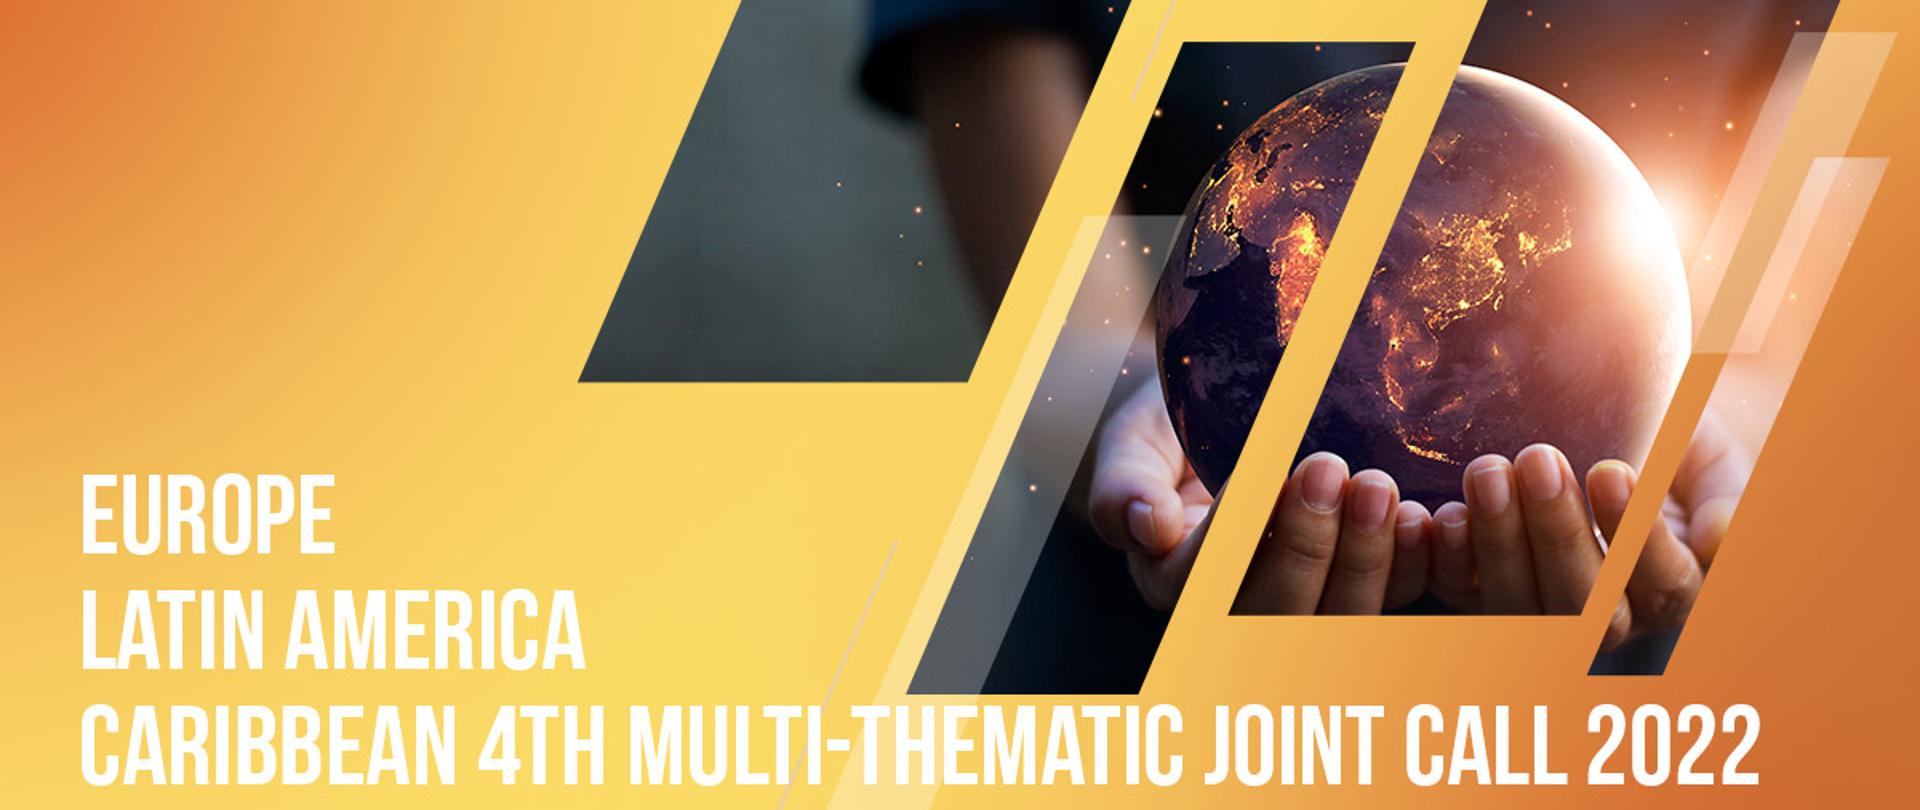 Europe / Latin America / Caribbean 4th Multi-Thematic Joint Call 2022